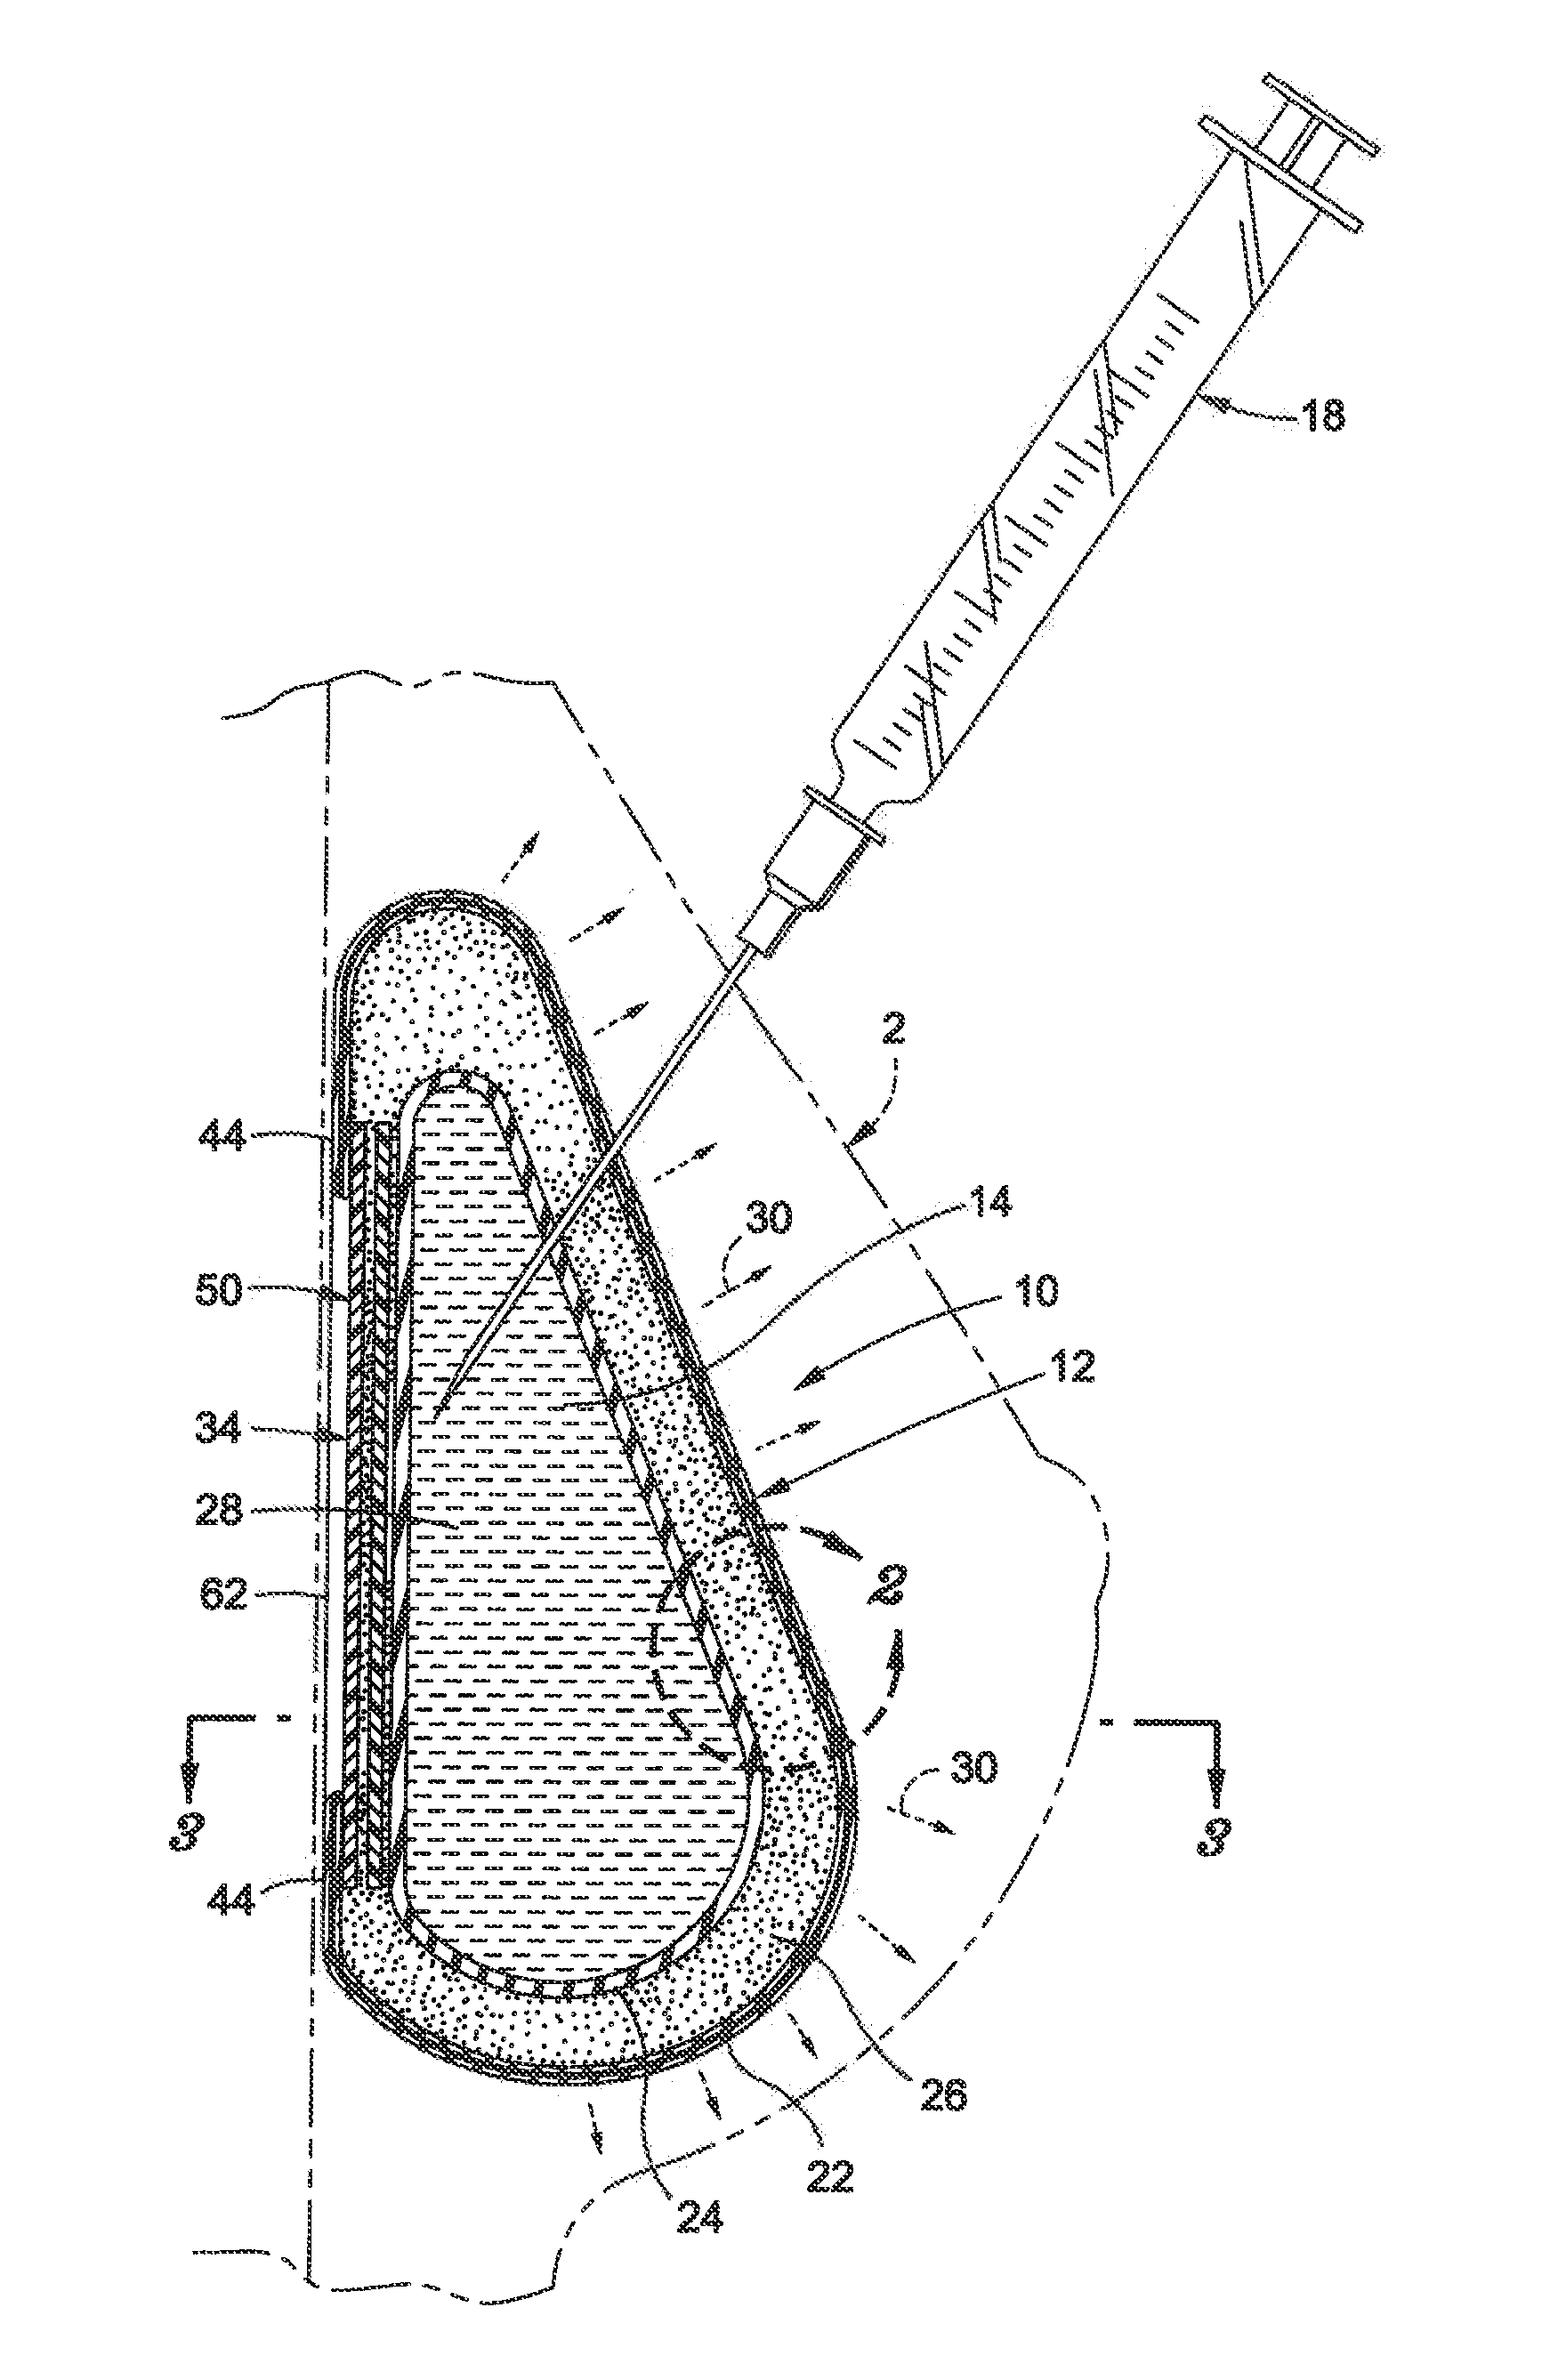 Inflatable prostheses and methods of making same